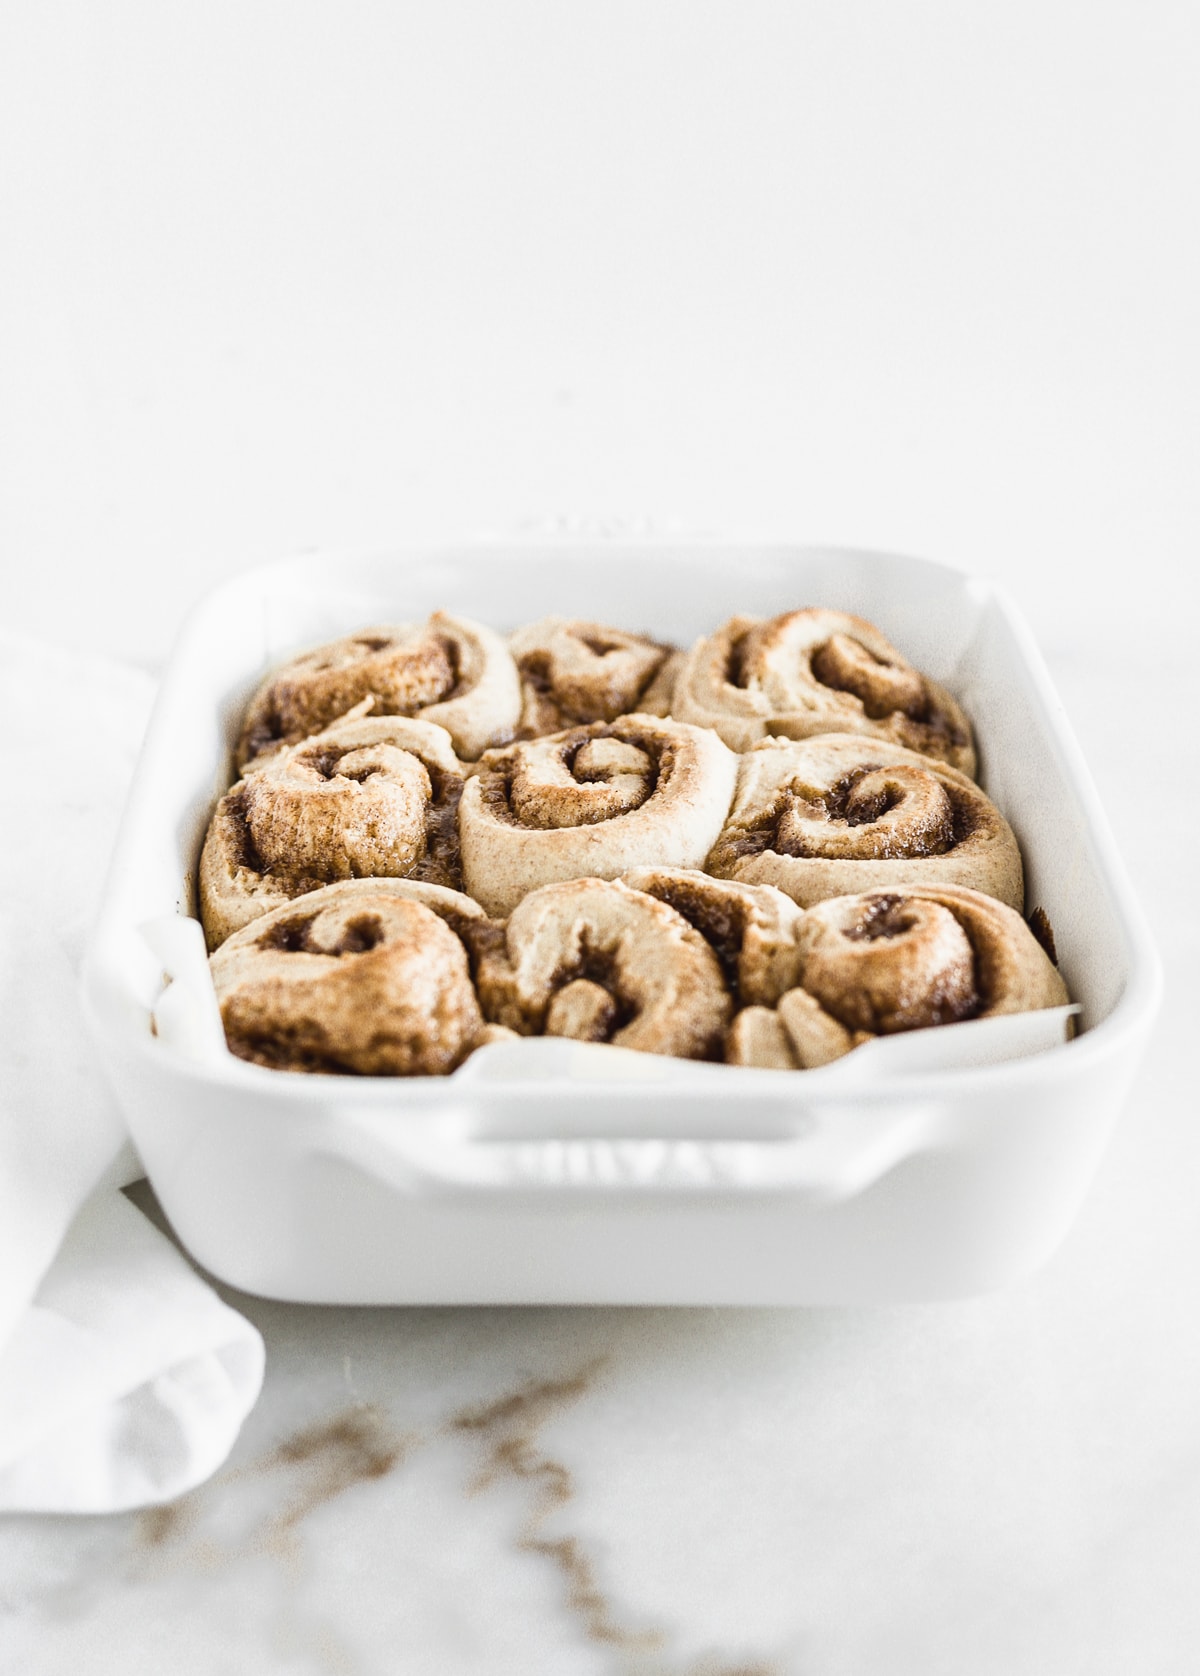 sourdough discard cinnamon rolls in a white baking dish after baking.